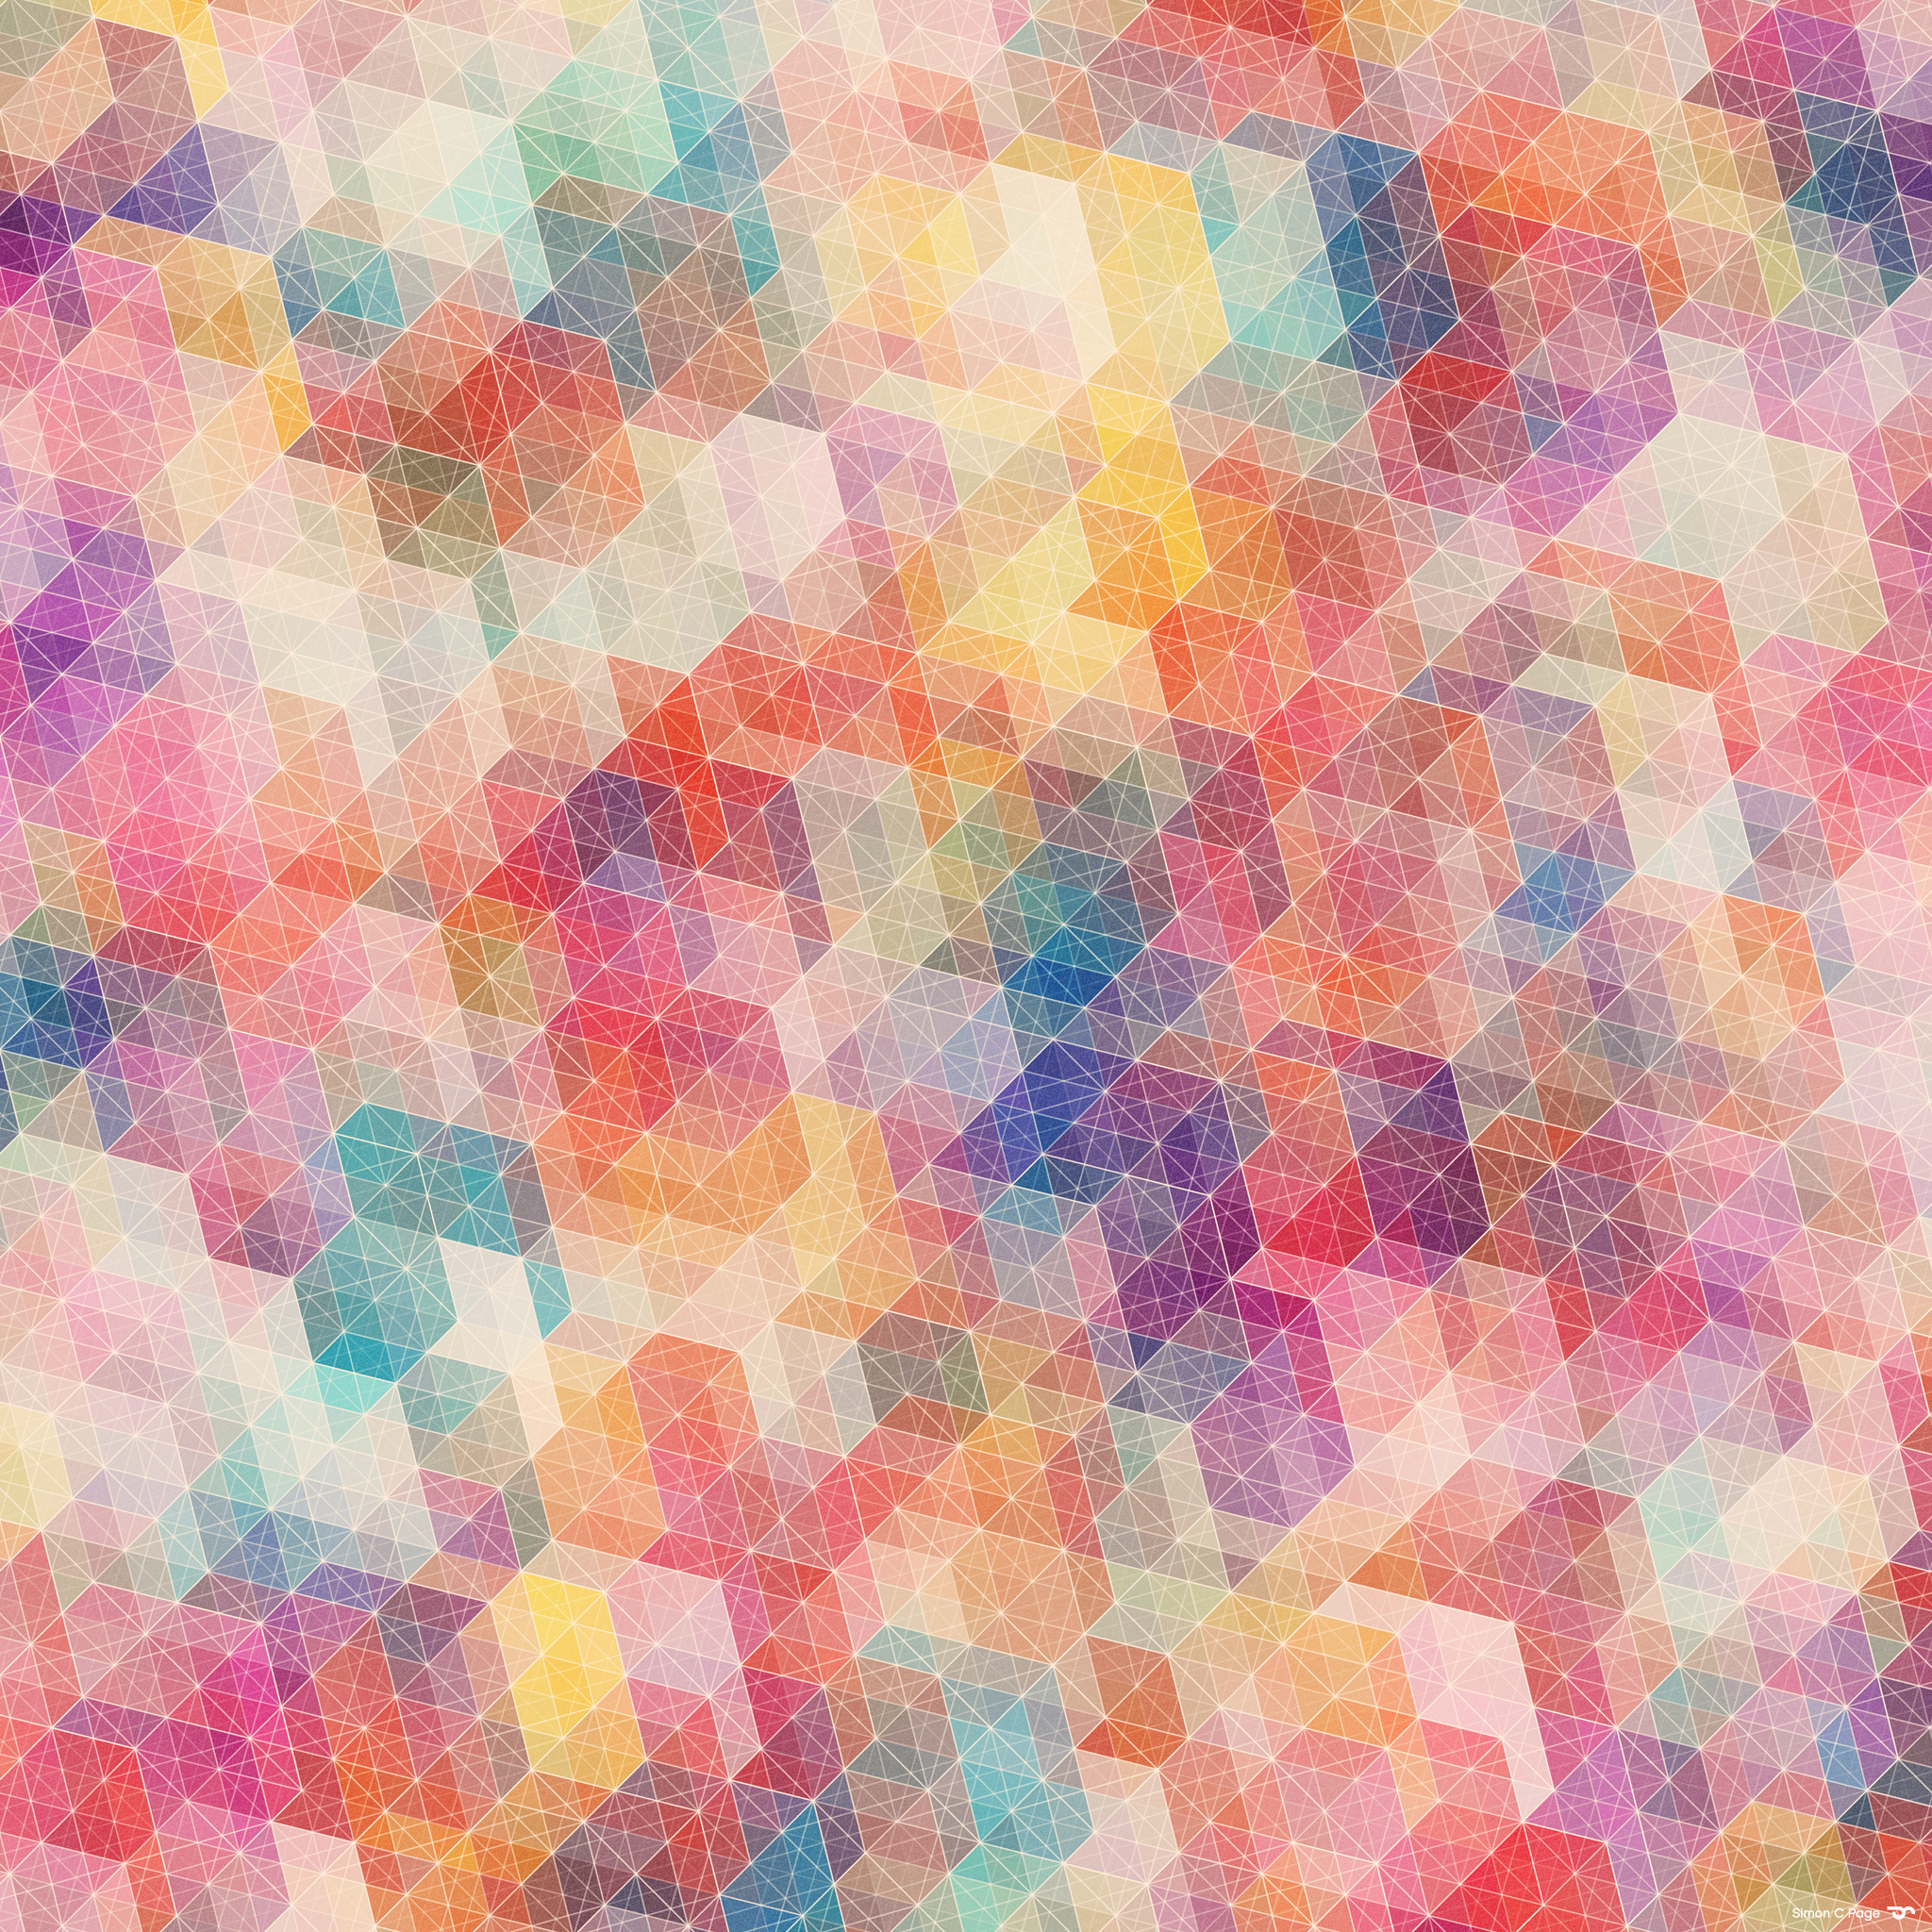 Download These 6 Gorgeously Geometric Retina Wallpapers For Your ...